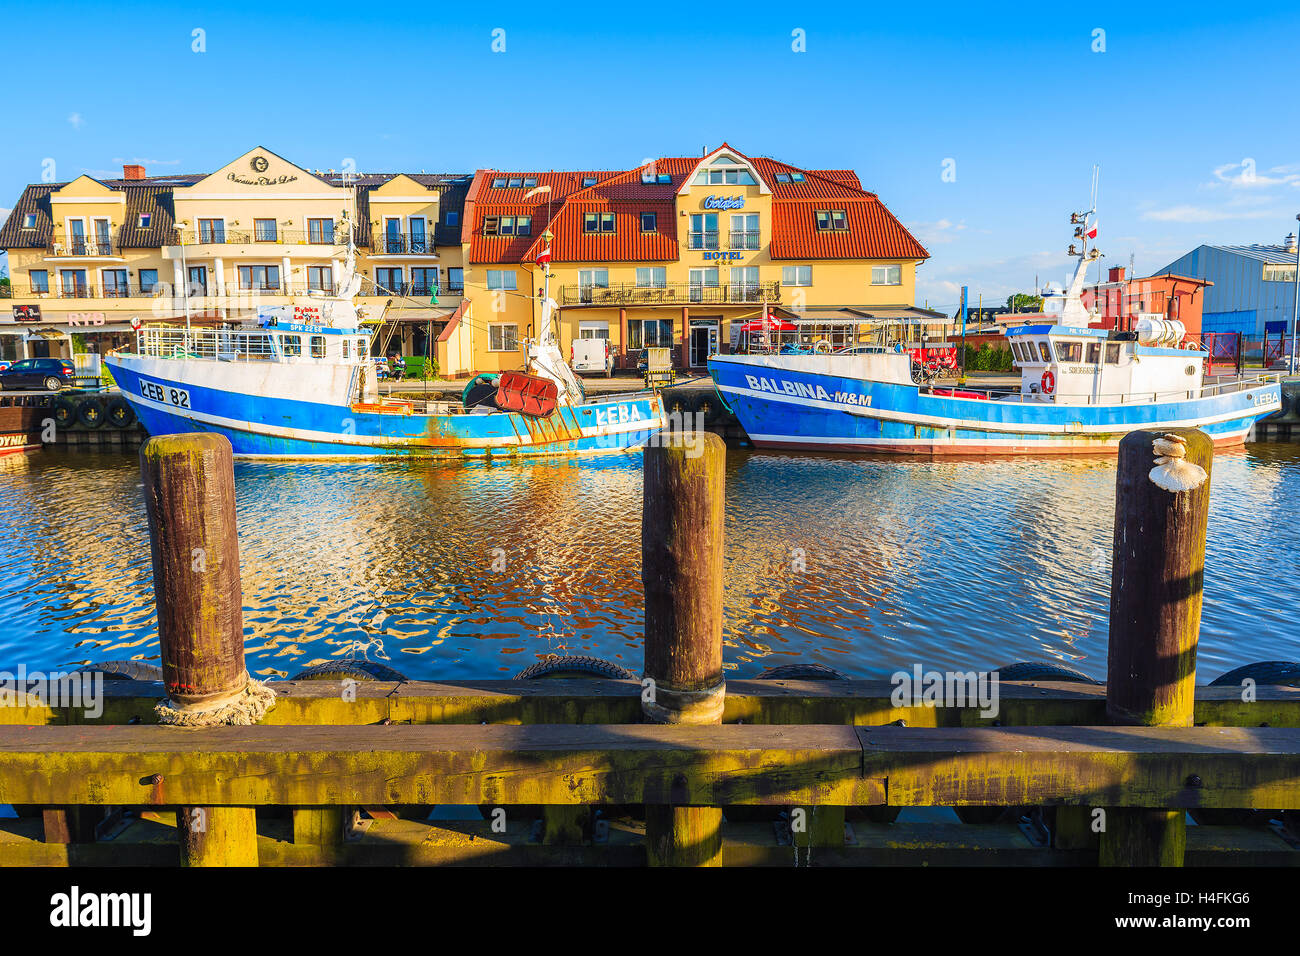 LEBA PORT, POLAND - JUN 18, 2016: fishing boats mooring in Leba port at sunset time. Leba is famous for large port located at Ba Stock Photo